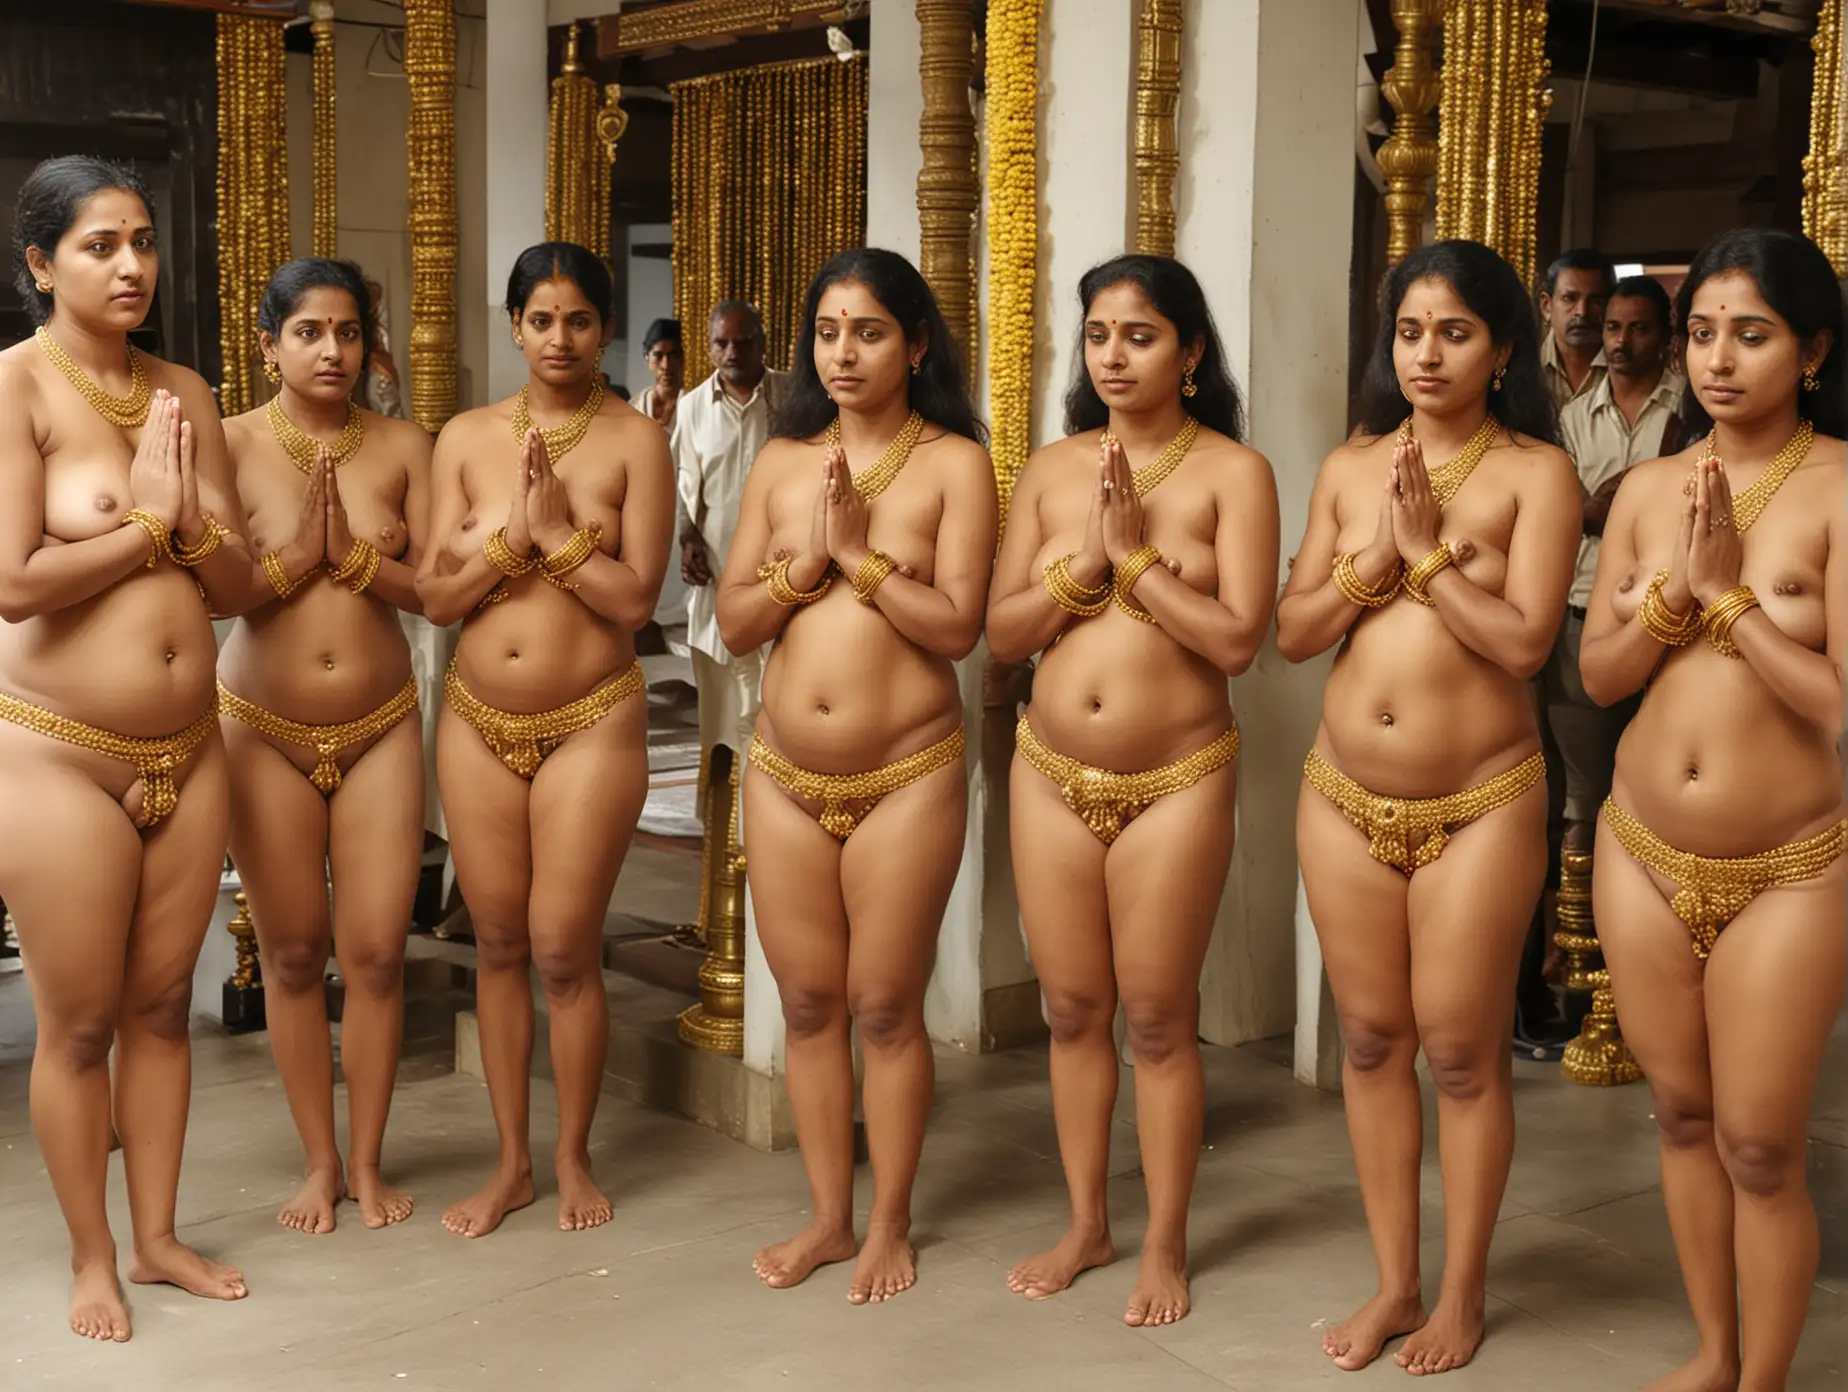 Naked kerala mature mothers praying in temple with naked daughters with gold ornaments and husbands and clothed sons.